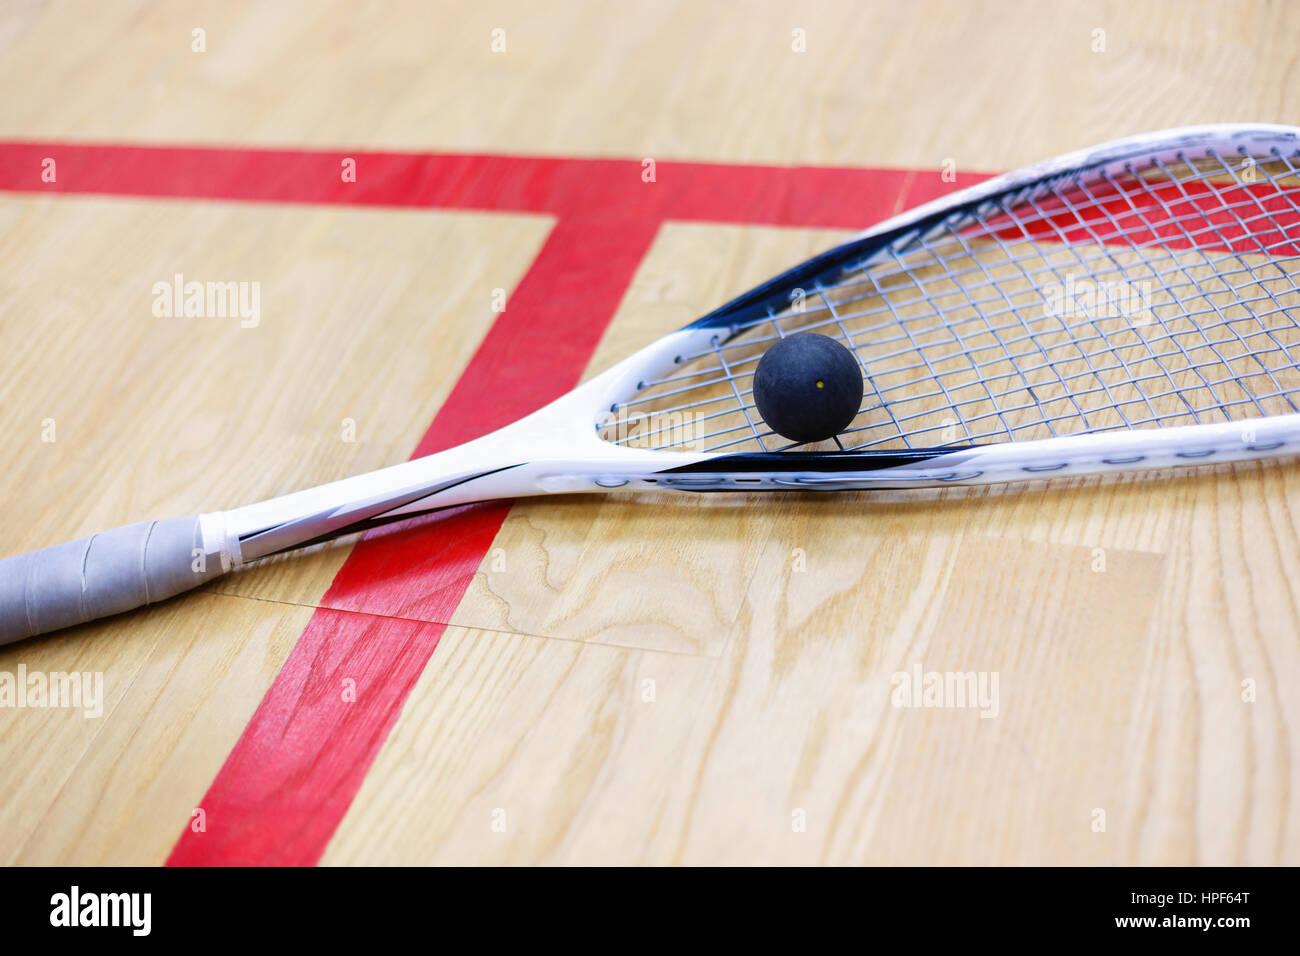 squash racket and ball on the wooden background. Racquetball equipment. Squash ball and squash racket on the court next to a red line. Photo with sele Stock Photo